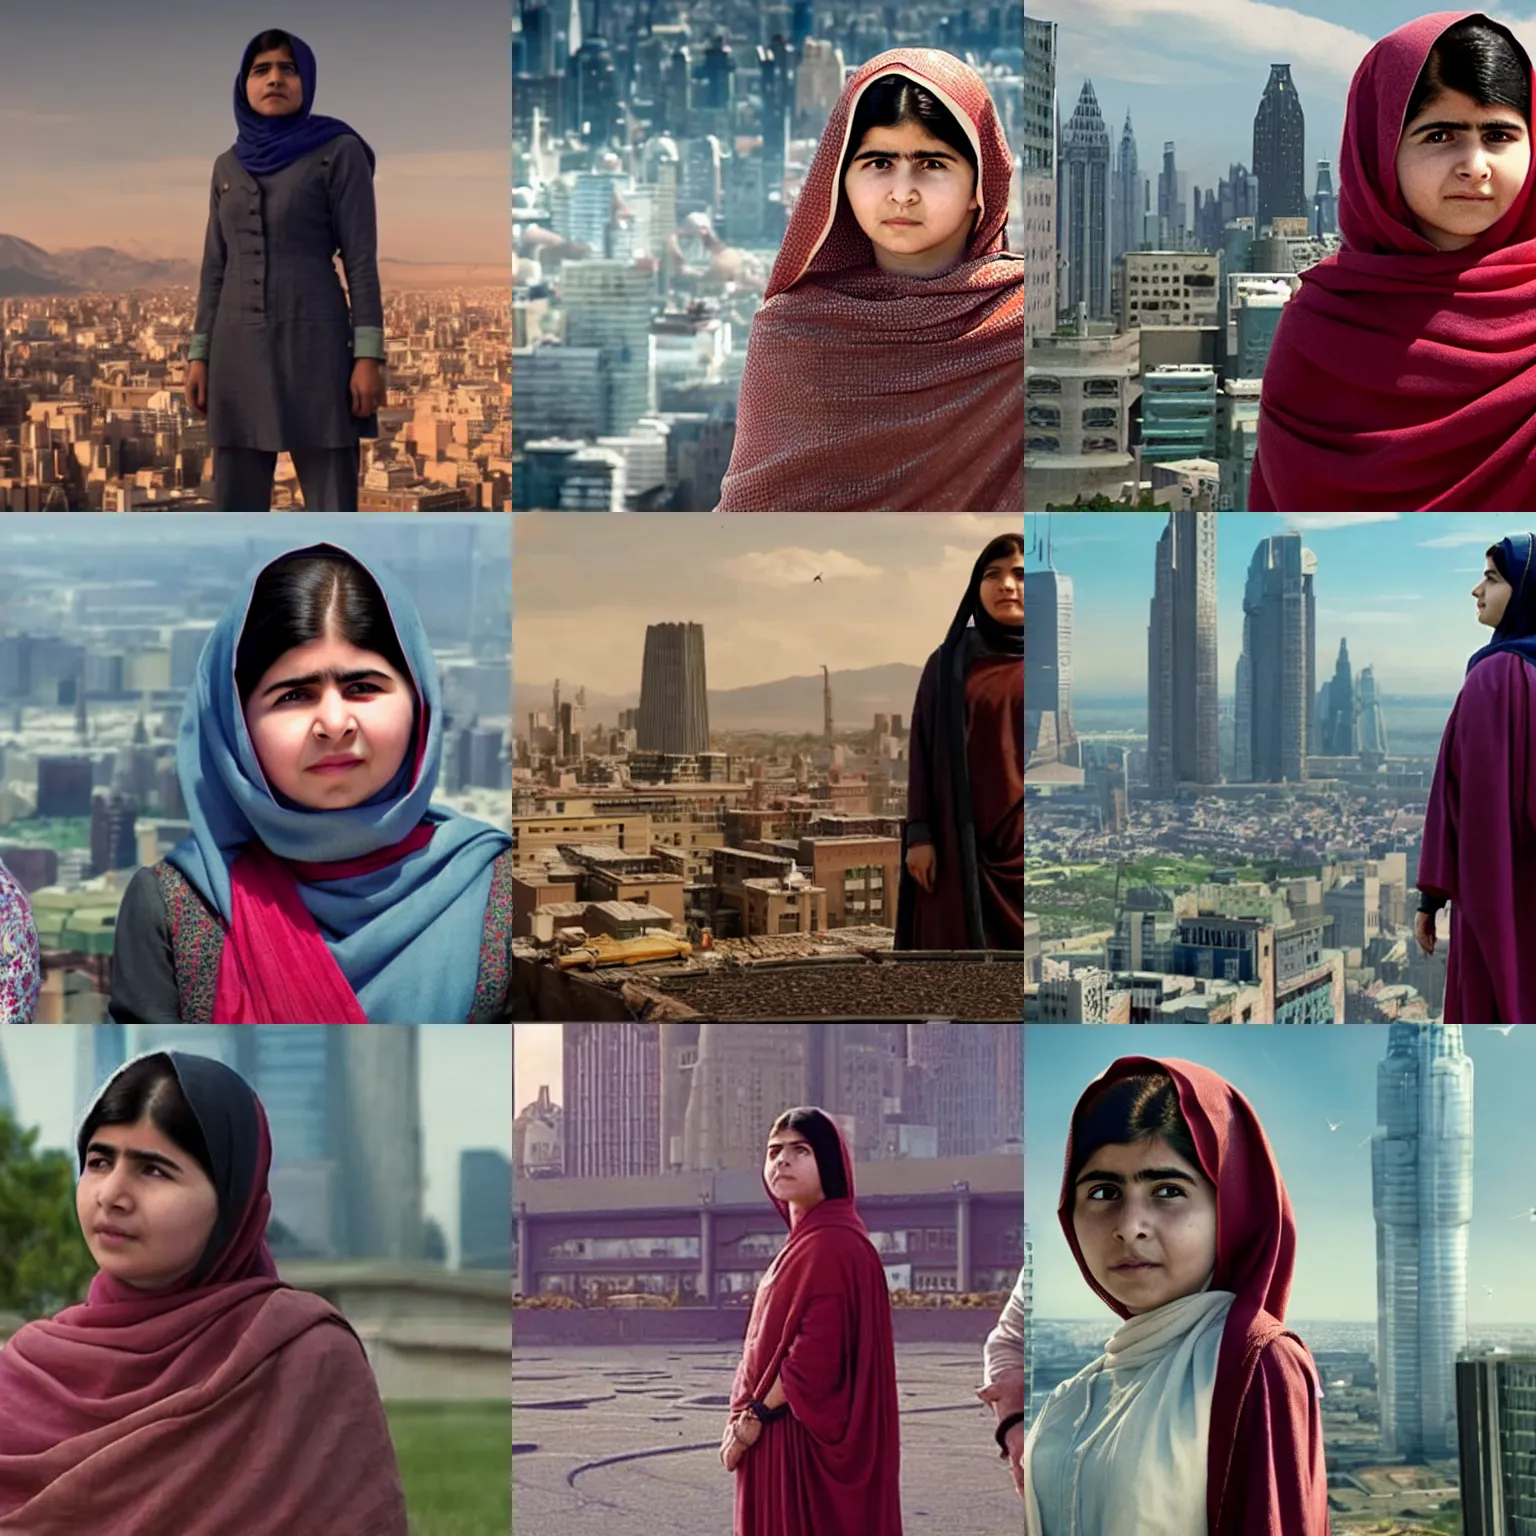 Prompt: Malala Yousafzai grows to an enormous size and towers over a city, film still from 'Ant-Man and the Wasp'